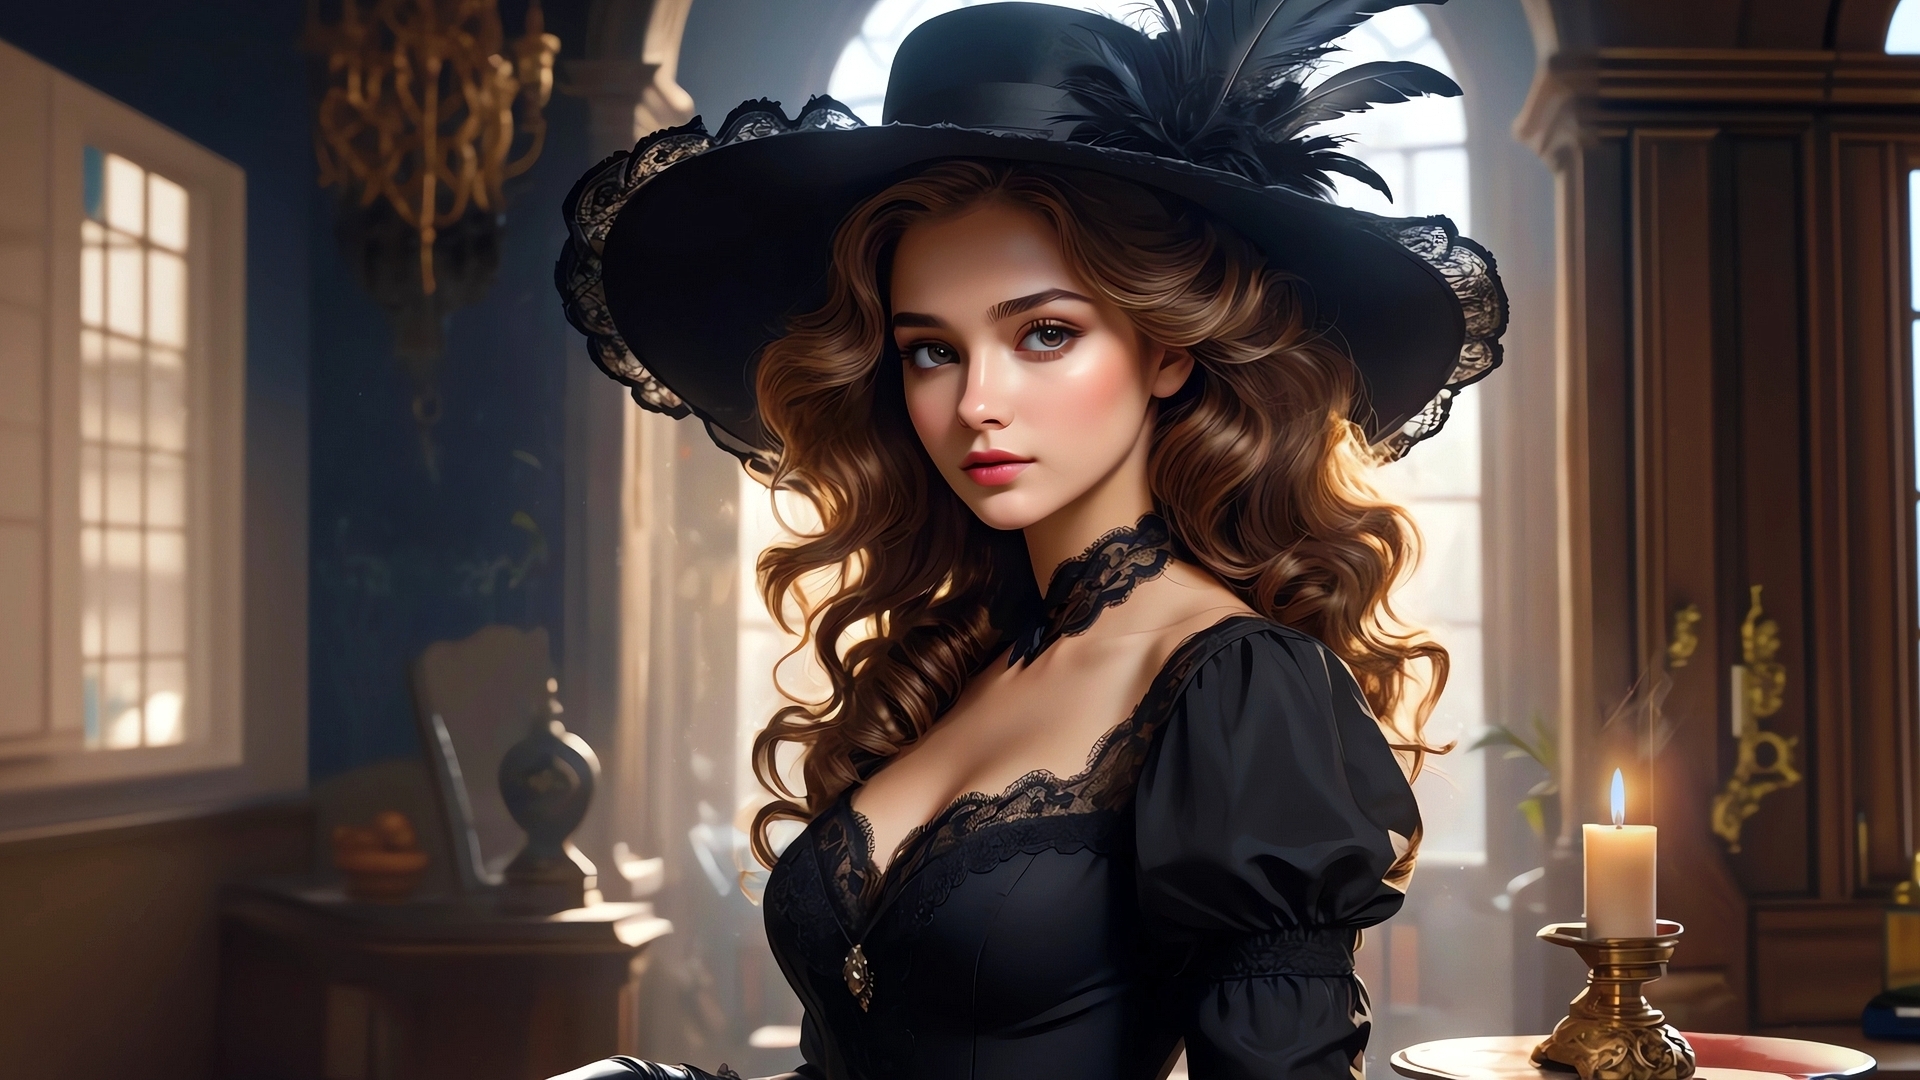 Free photo Portrait of a girl in a black dress and hat